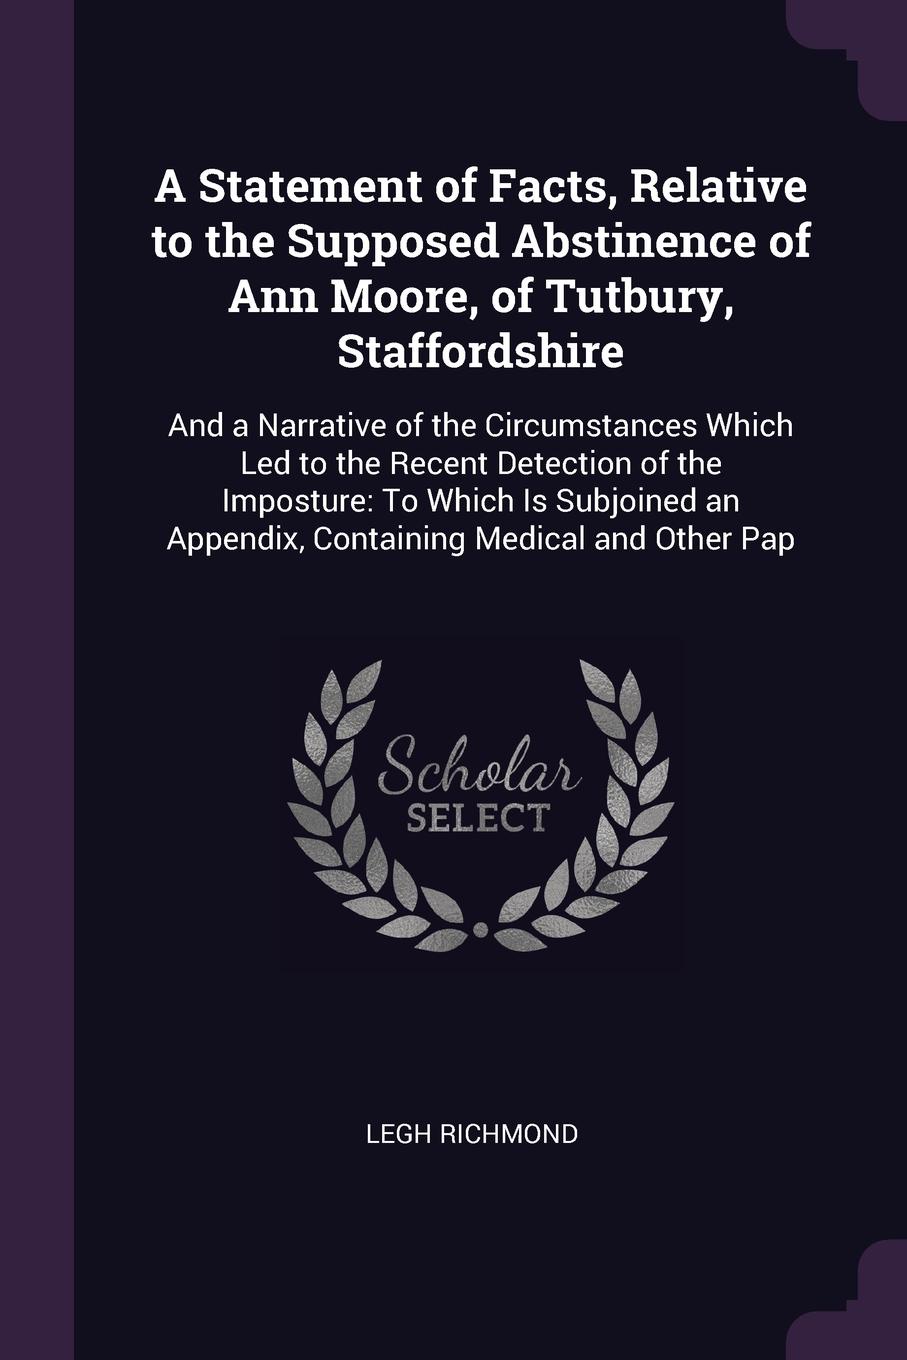 A Statement of Facts, Relative to the Supposed Abstinence of Ann Moore, of Tutbury, Staffordshire. And a Narrative of the Circumstances Which Led to the Recent Detection of the Imposture: To Which Is Subjoined an Appendix, Containing Medical and O...